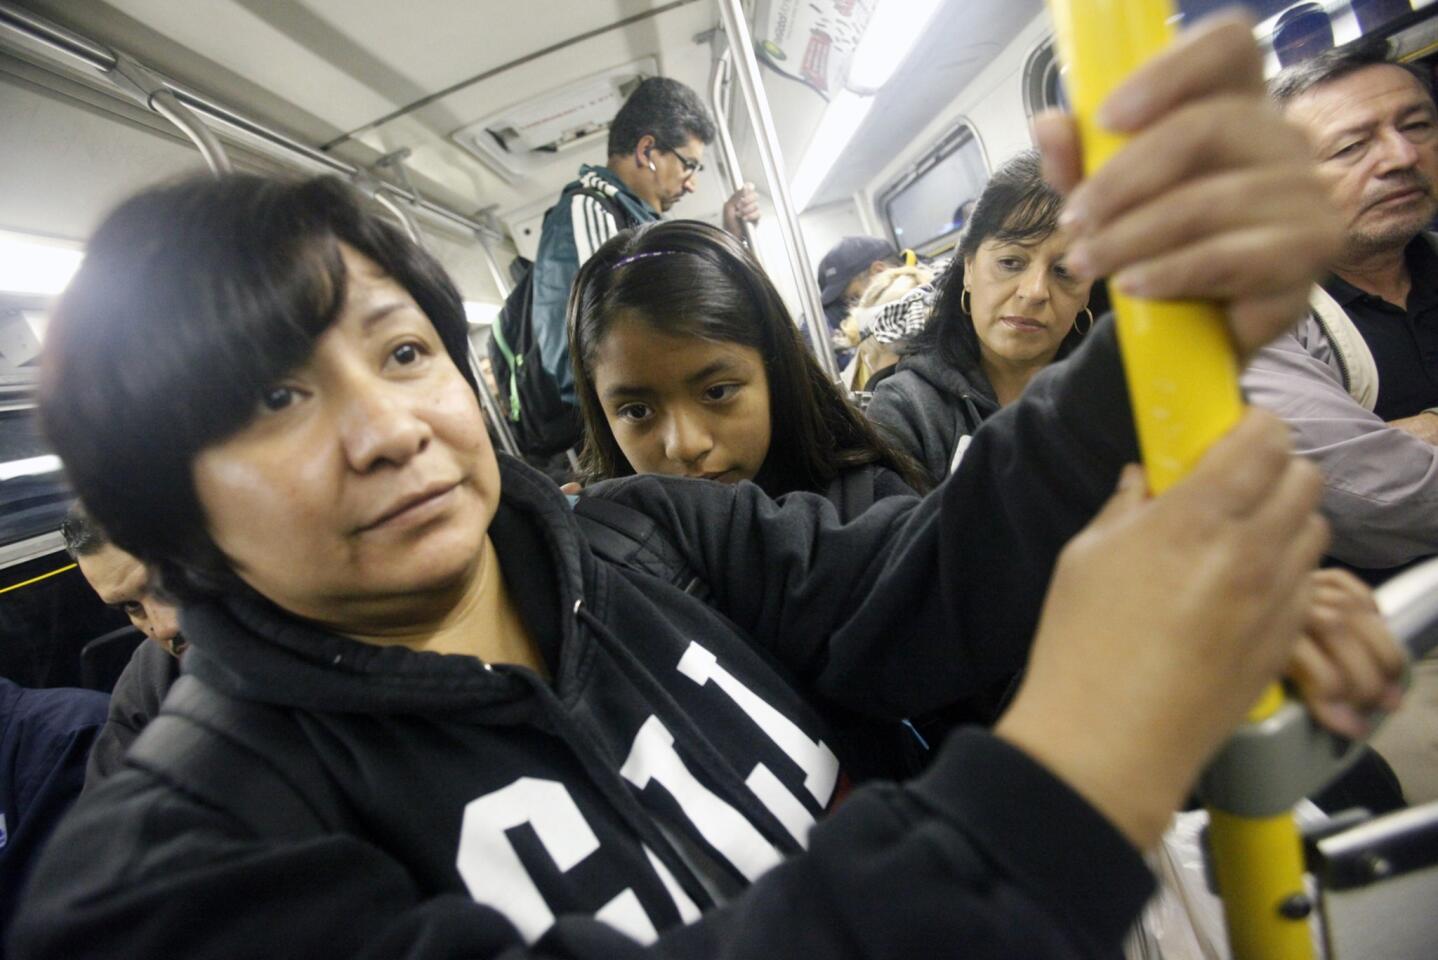 Carmen Mendoza and her daughter Nicole, 11, ride the 760 bus at the beginning of their 15-mile trek by MTA bus from their home in Bell Gardens to school and work in downtown L.A.